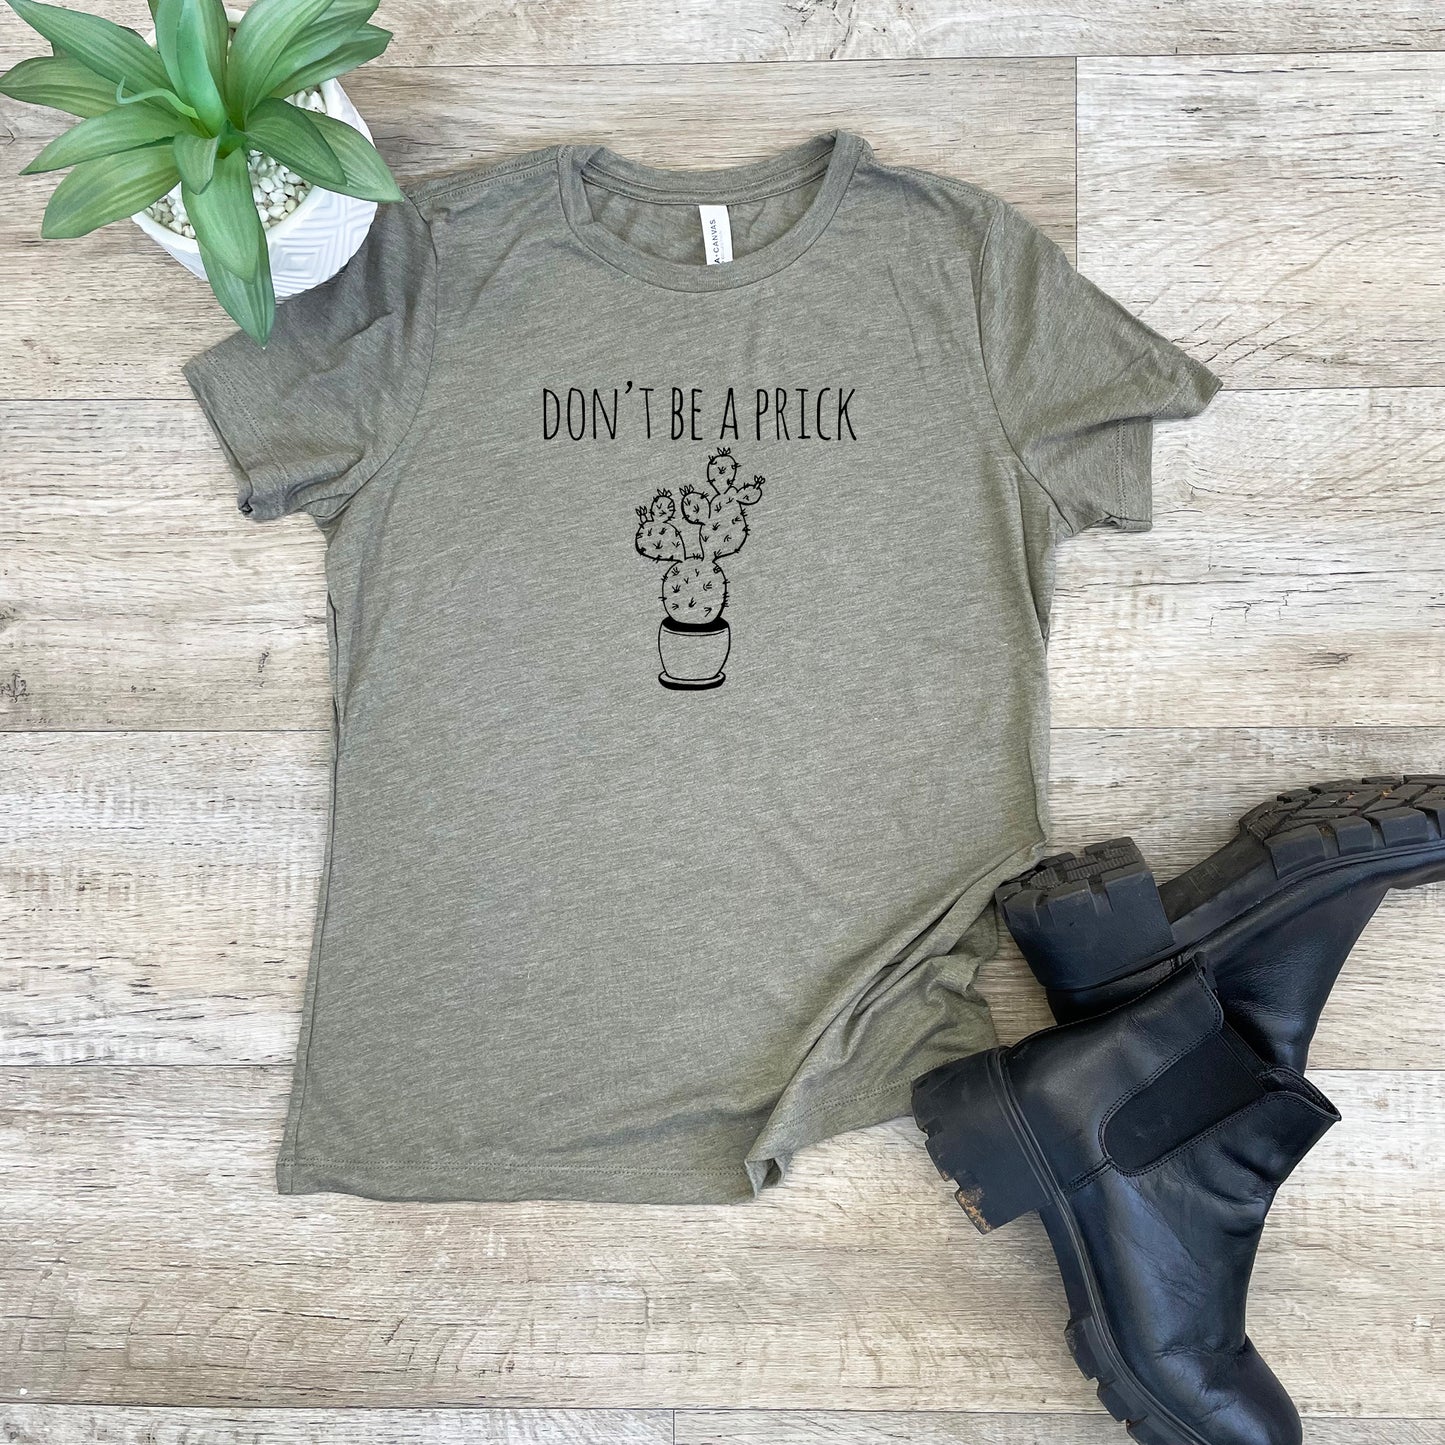 Don't Be A Prick - Women's Crew Tee - Olive or Dusty Blue